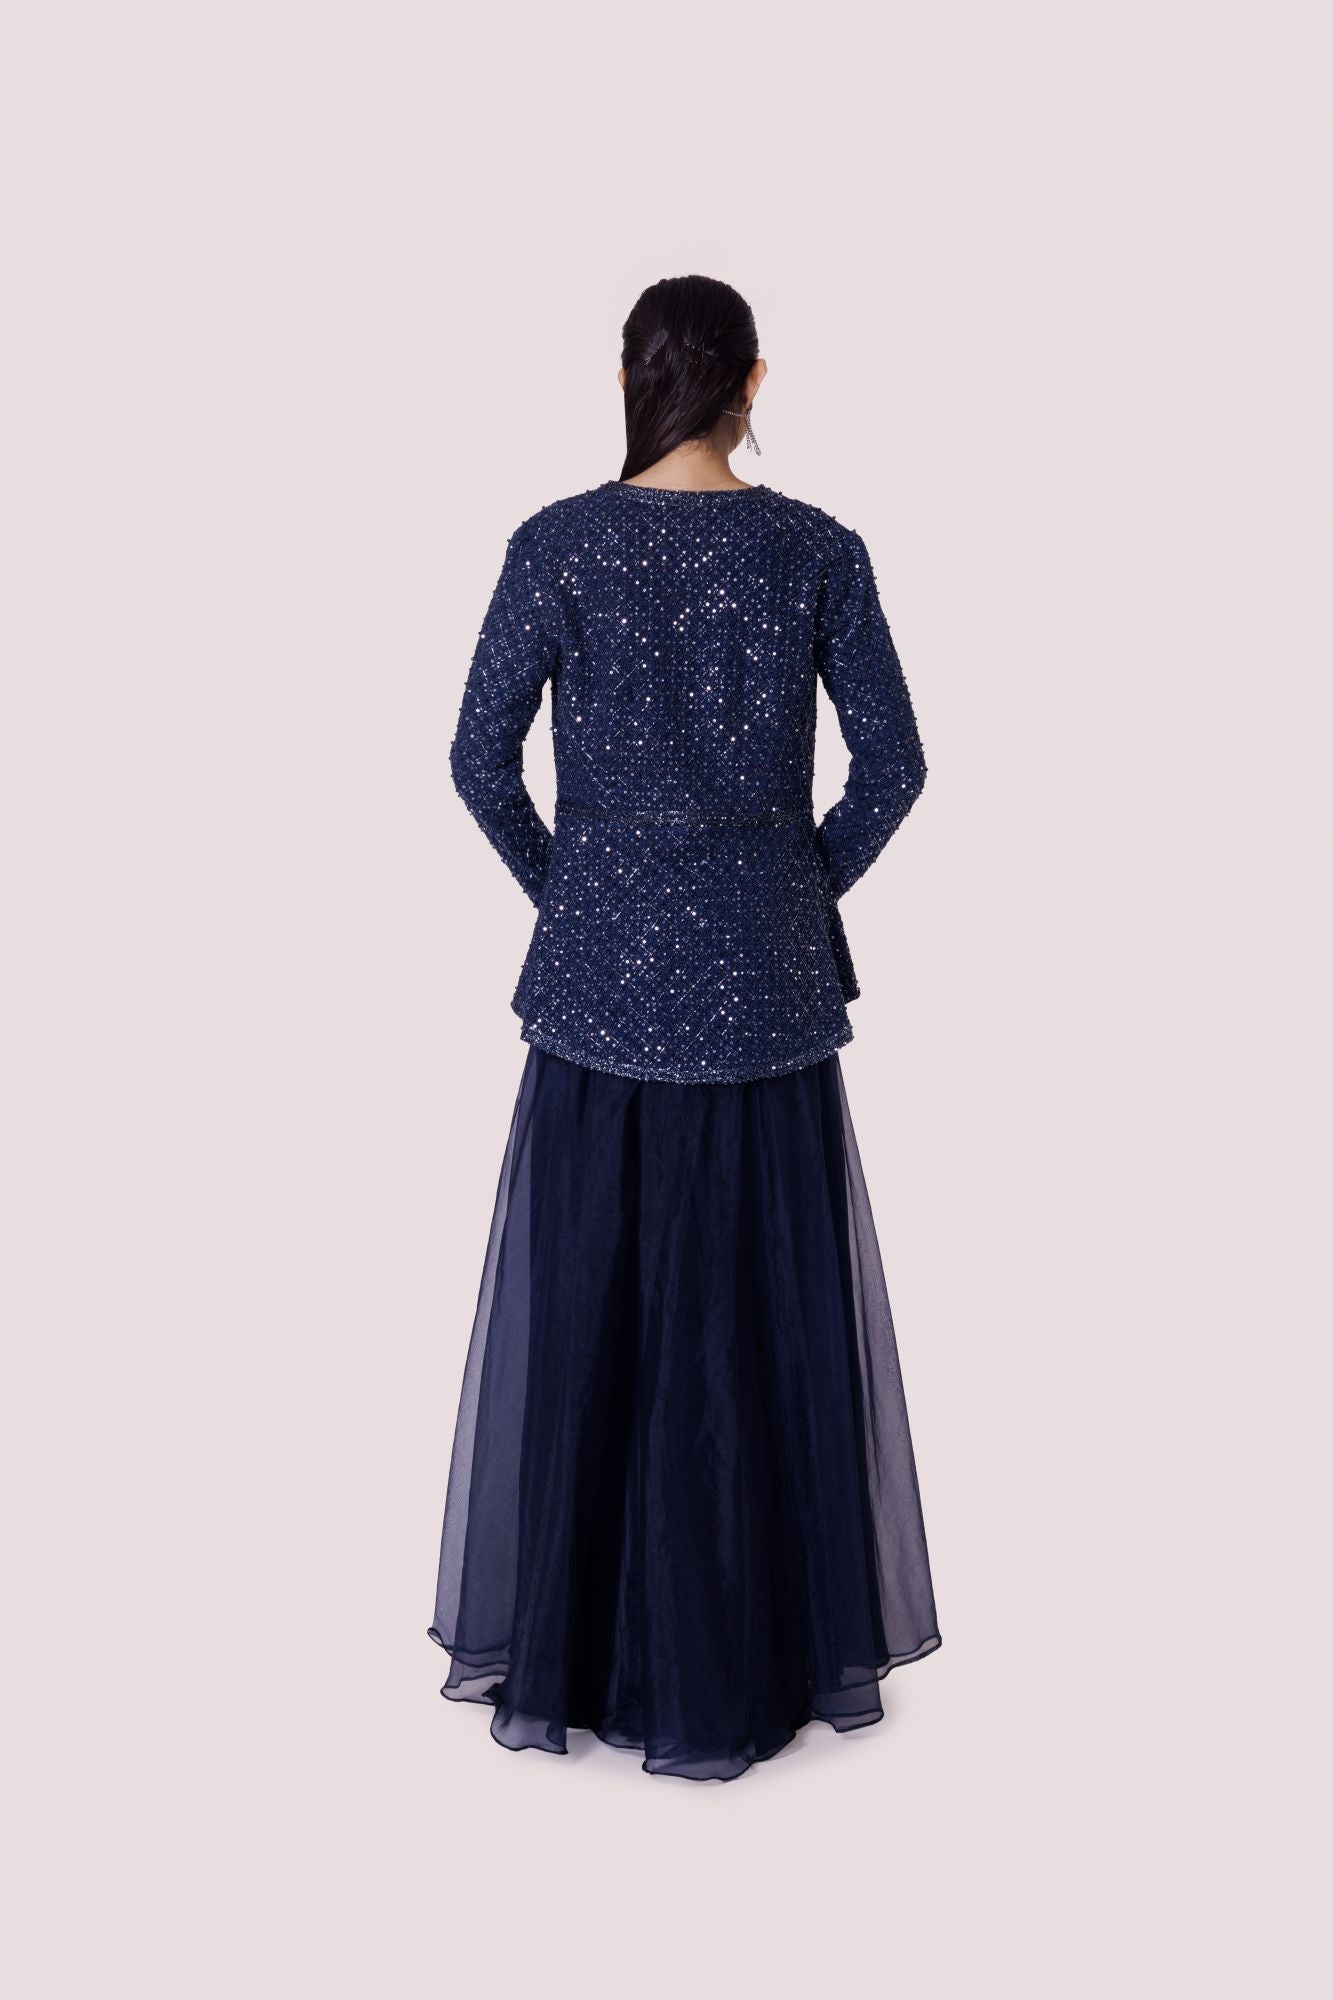 Shop navy blue embroidered organza and georgette skirt set online in USA. Shop the best and latest designs in embroidered sarees, designer sarees, Anarkali suit, lehengas, sharara suits for weddings and special occasions from Pure Elegance Indian fashion store in USA.-back